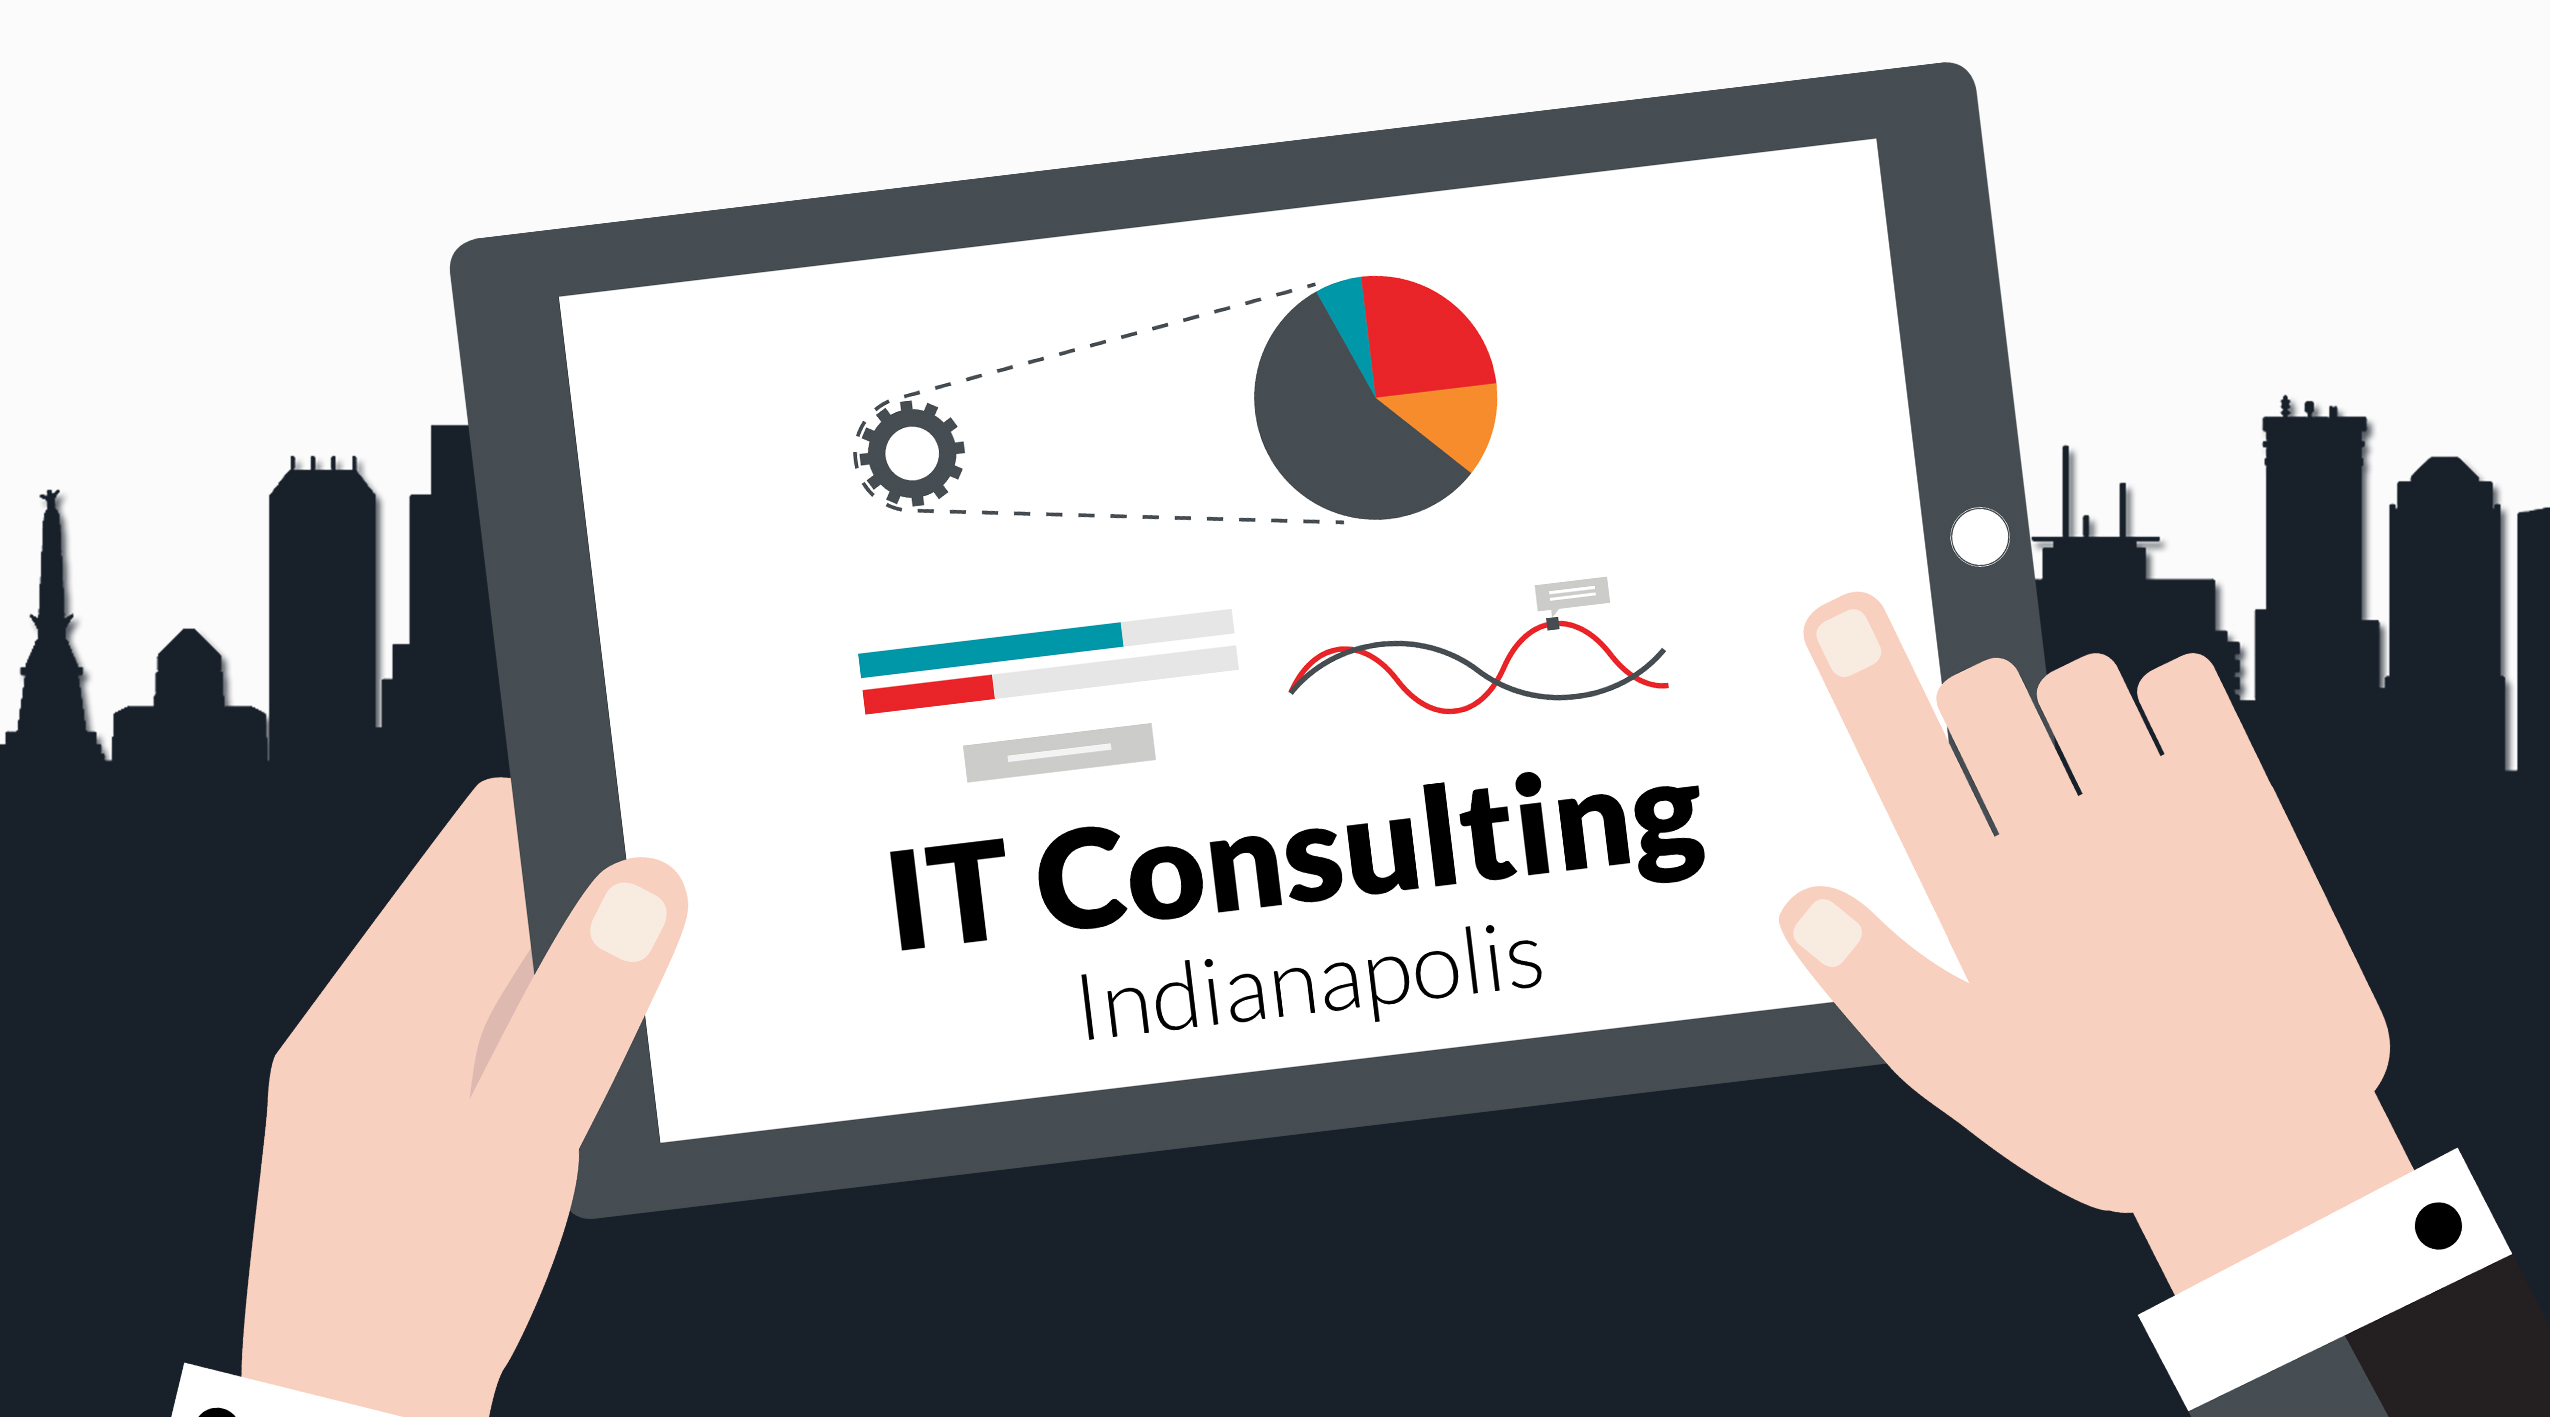 IT Consulting Indianapolis Firm, IT Services in Fishers, Noblesville, Carmel, Muncie, , Help Desk